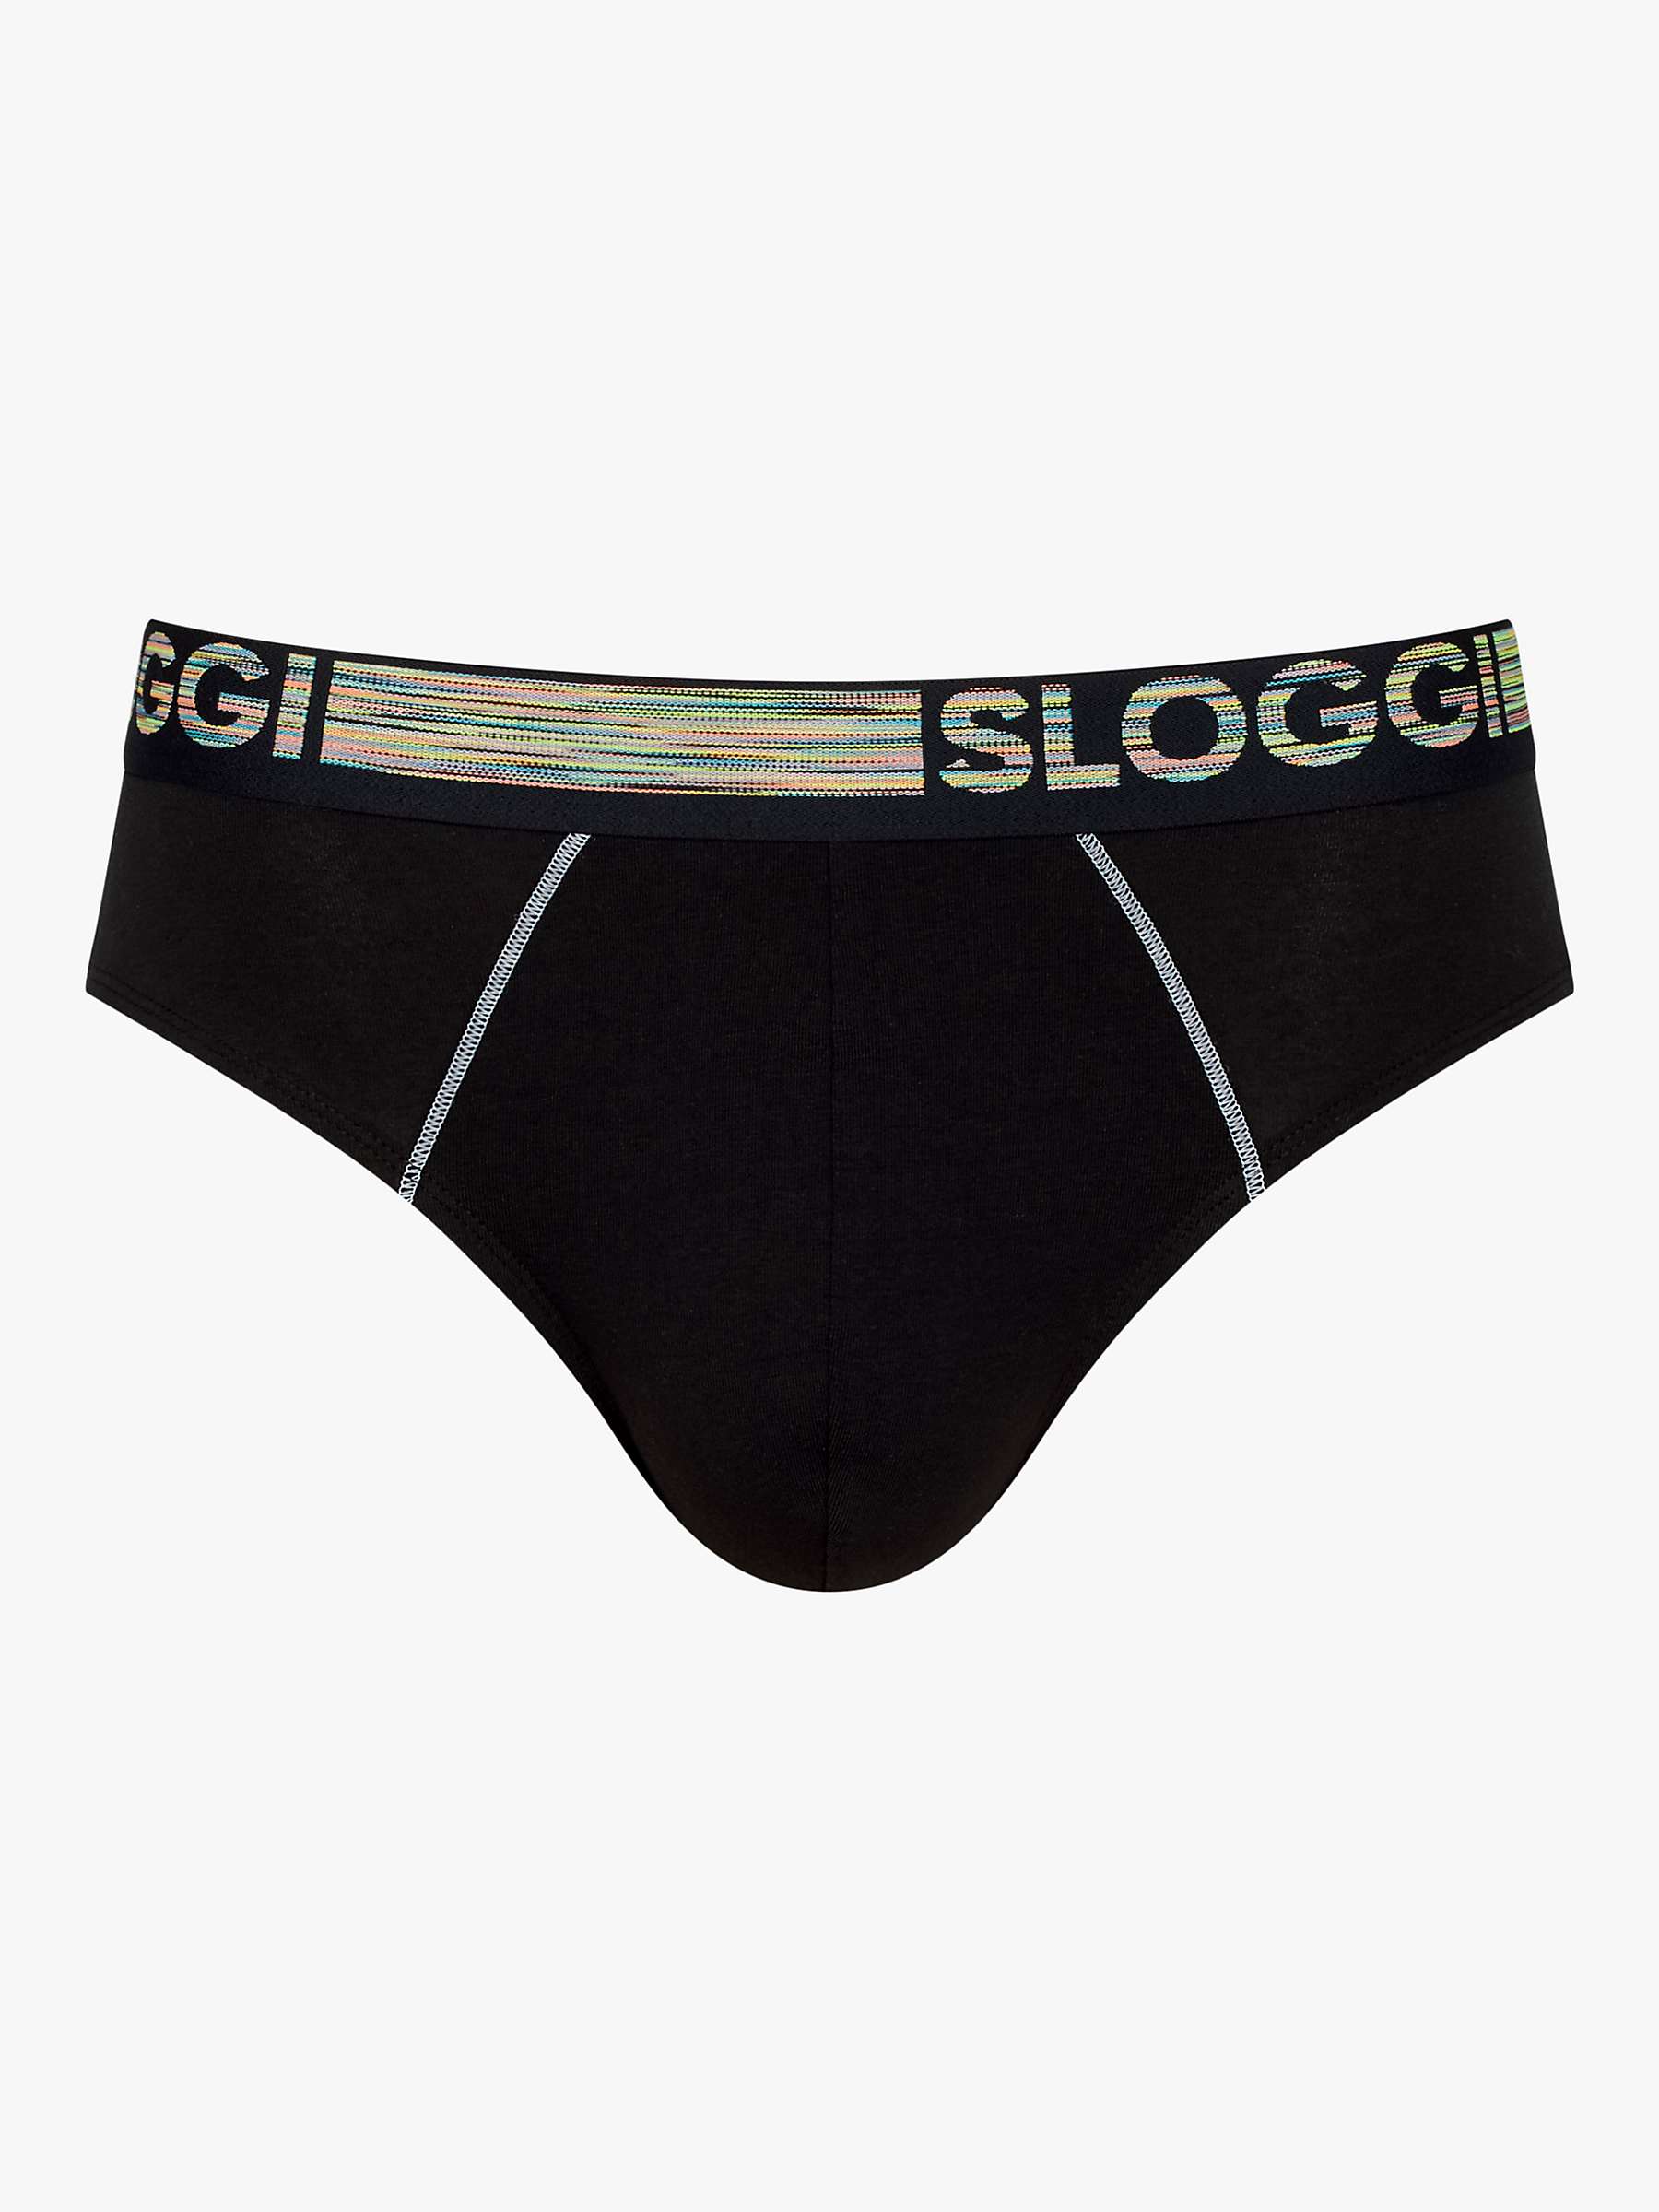 Buy sloggi GO ABC Natural Cotton Stretch Briefs, Pack of 2 Online at johnlewis.com